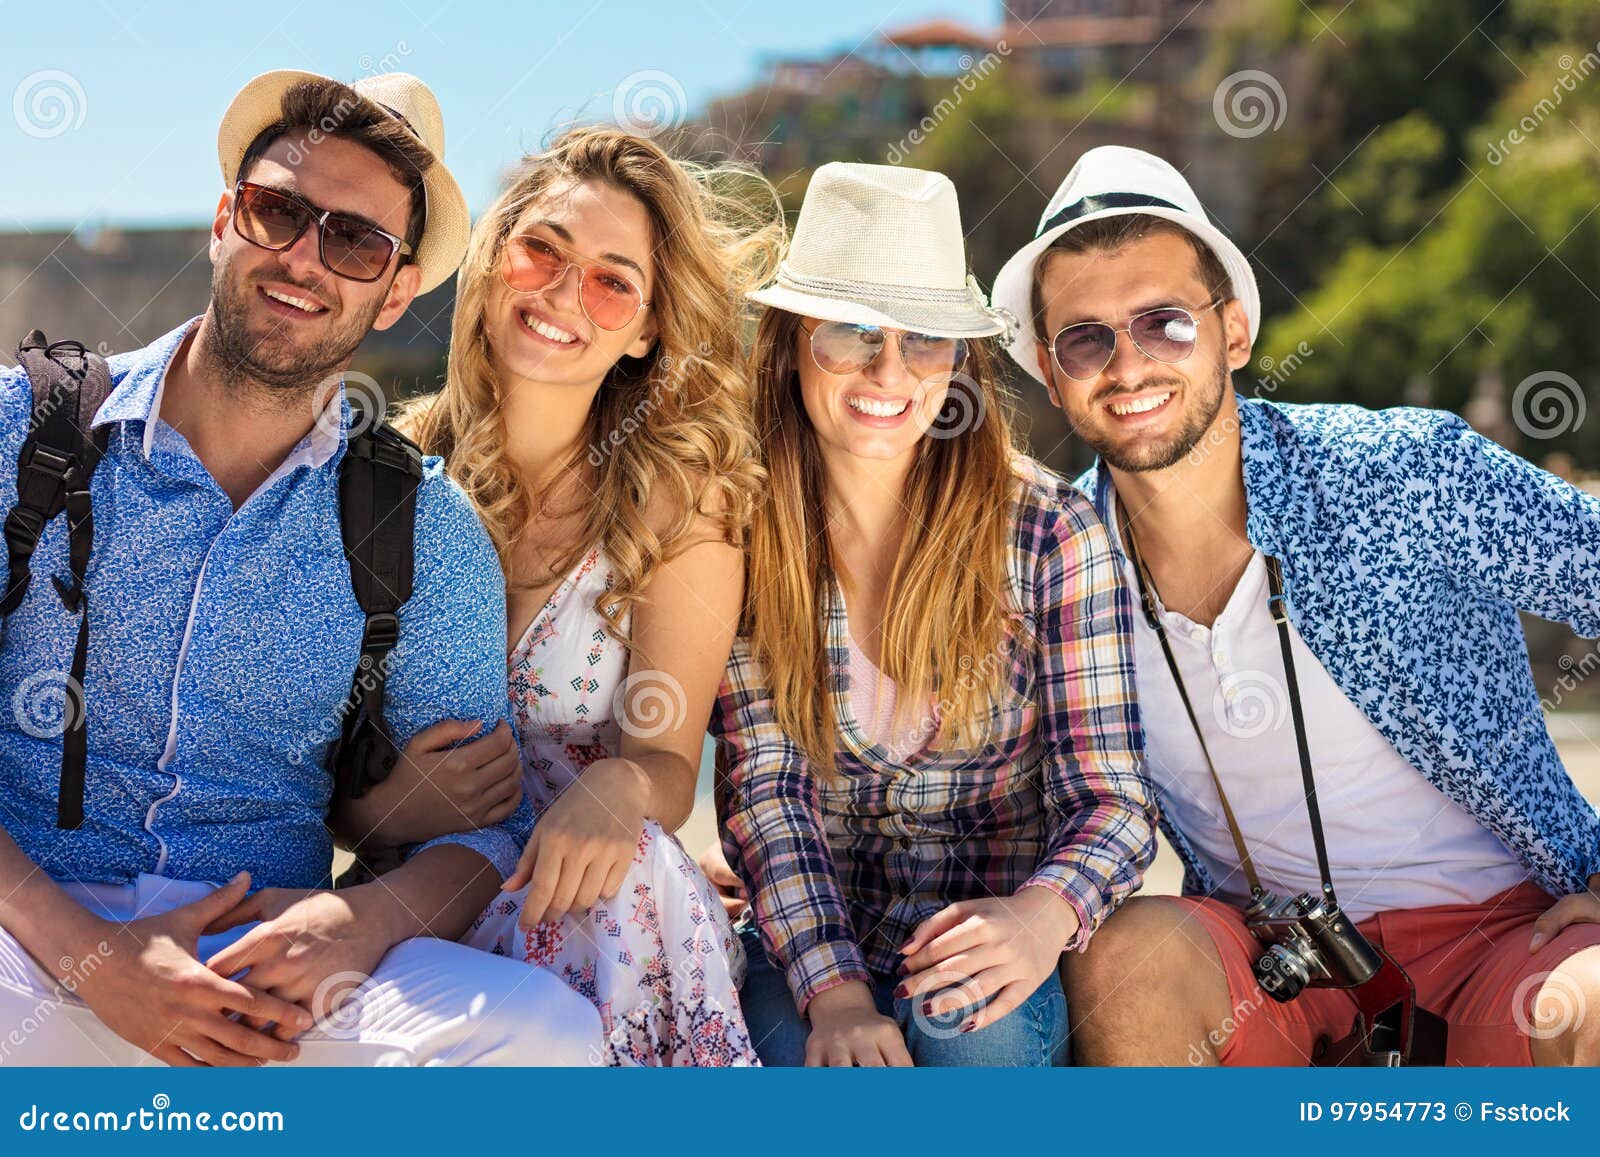 Group of Friends Taking Funny Portraits Outdoor Stock Image - Image of